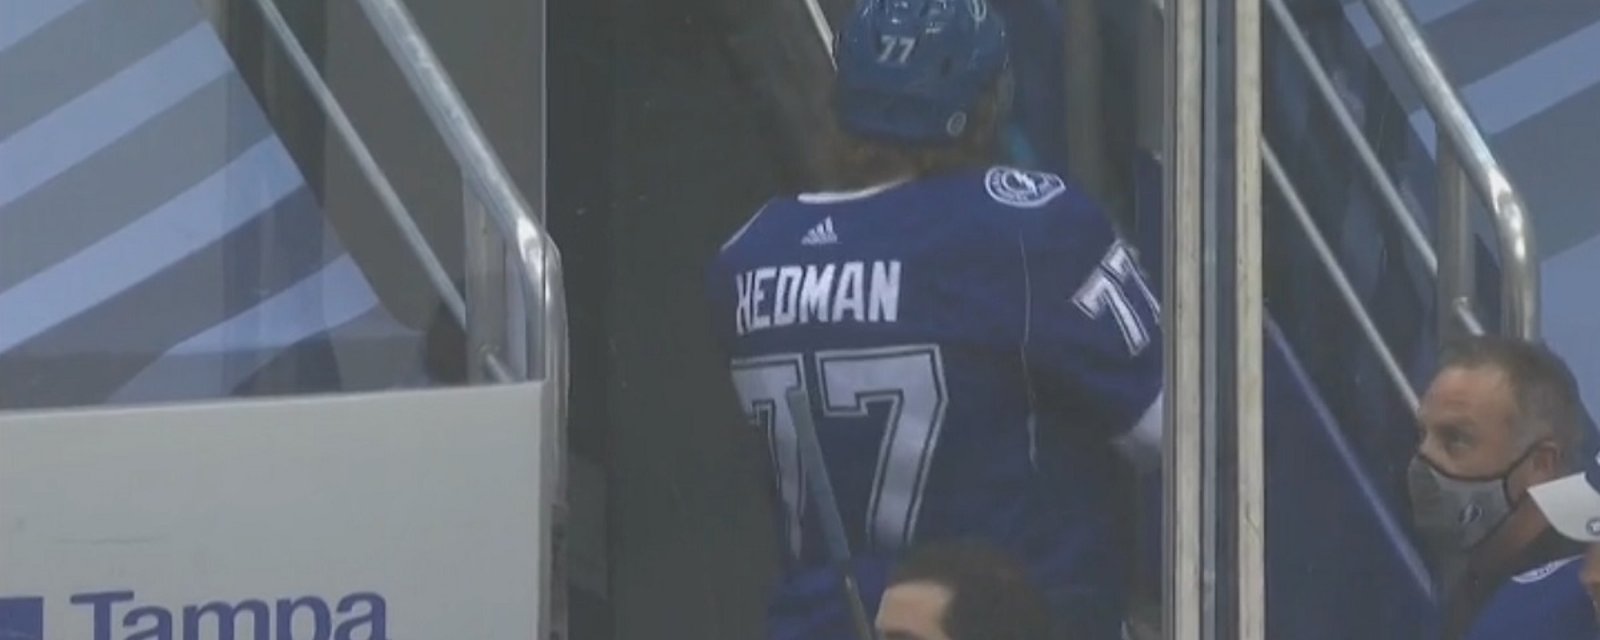 Hedman appears to suffer an injury and snaps on his way to the locker room.